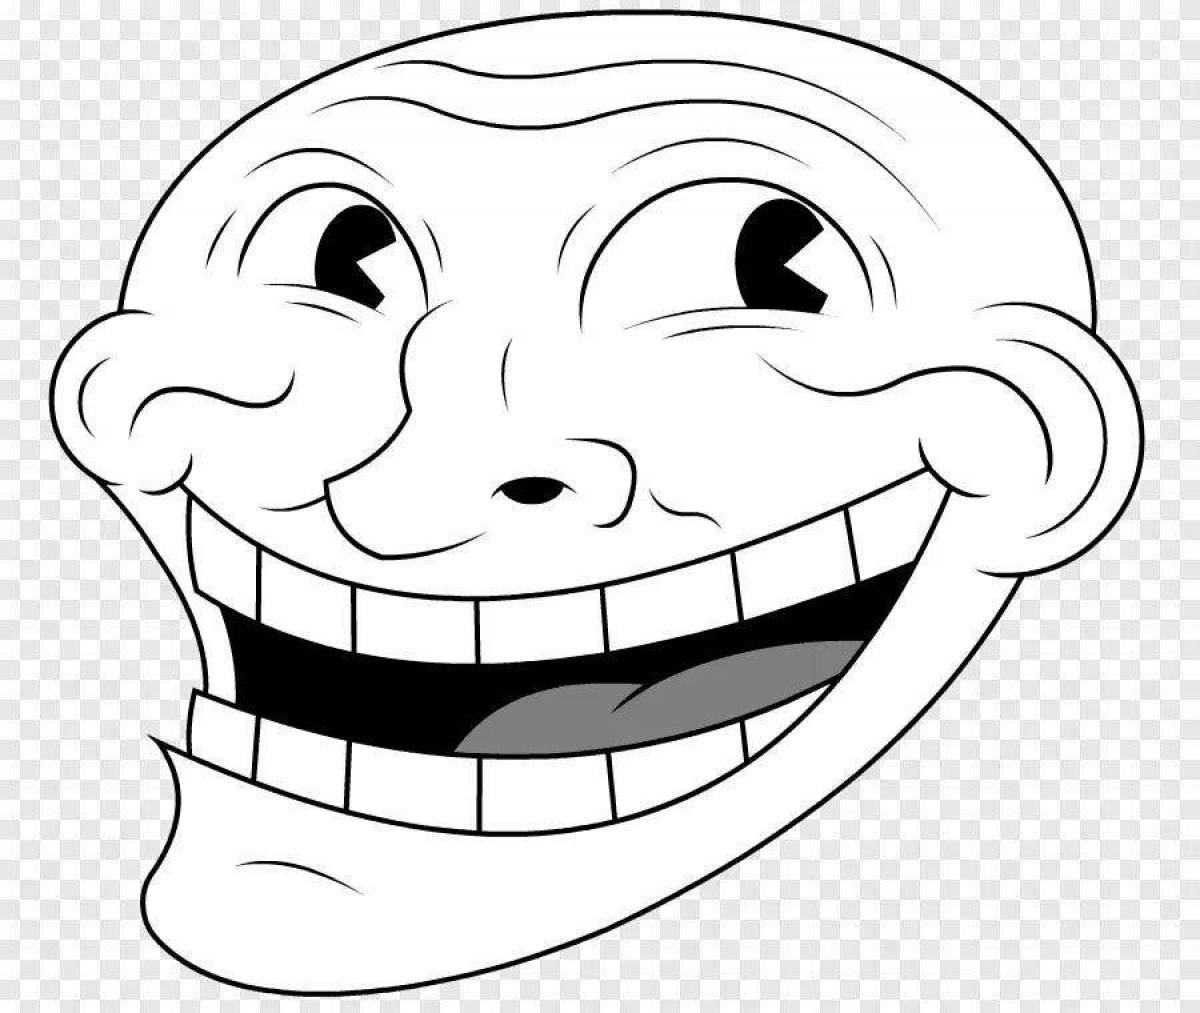 Amazing trollface coloring page